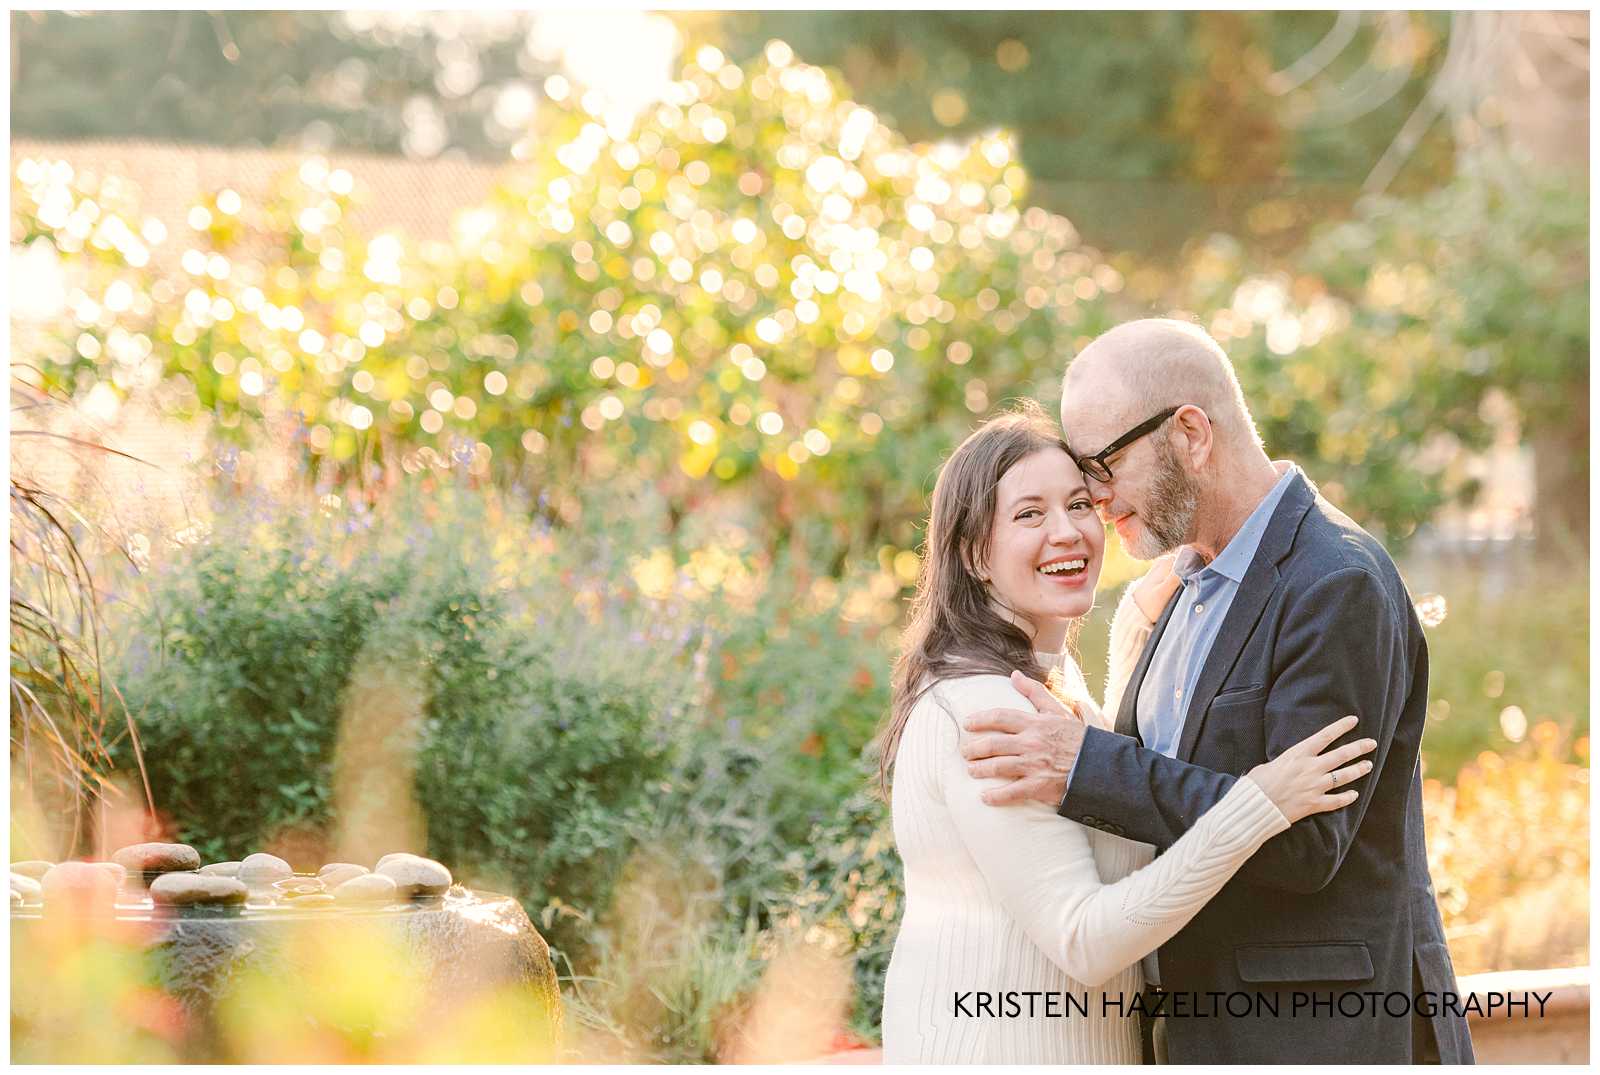 Woman in white dress with man in suit in photos by Bay Area Engagement Photographer Kristen Hazelton